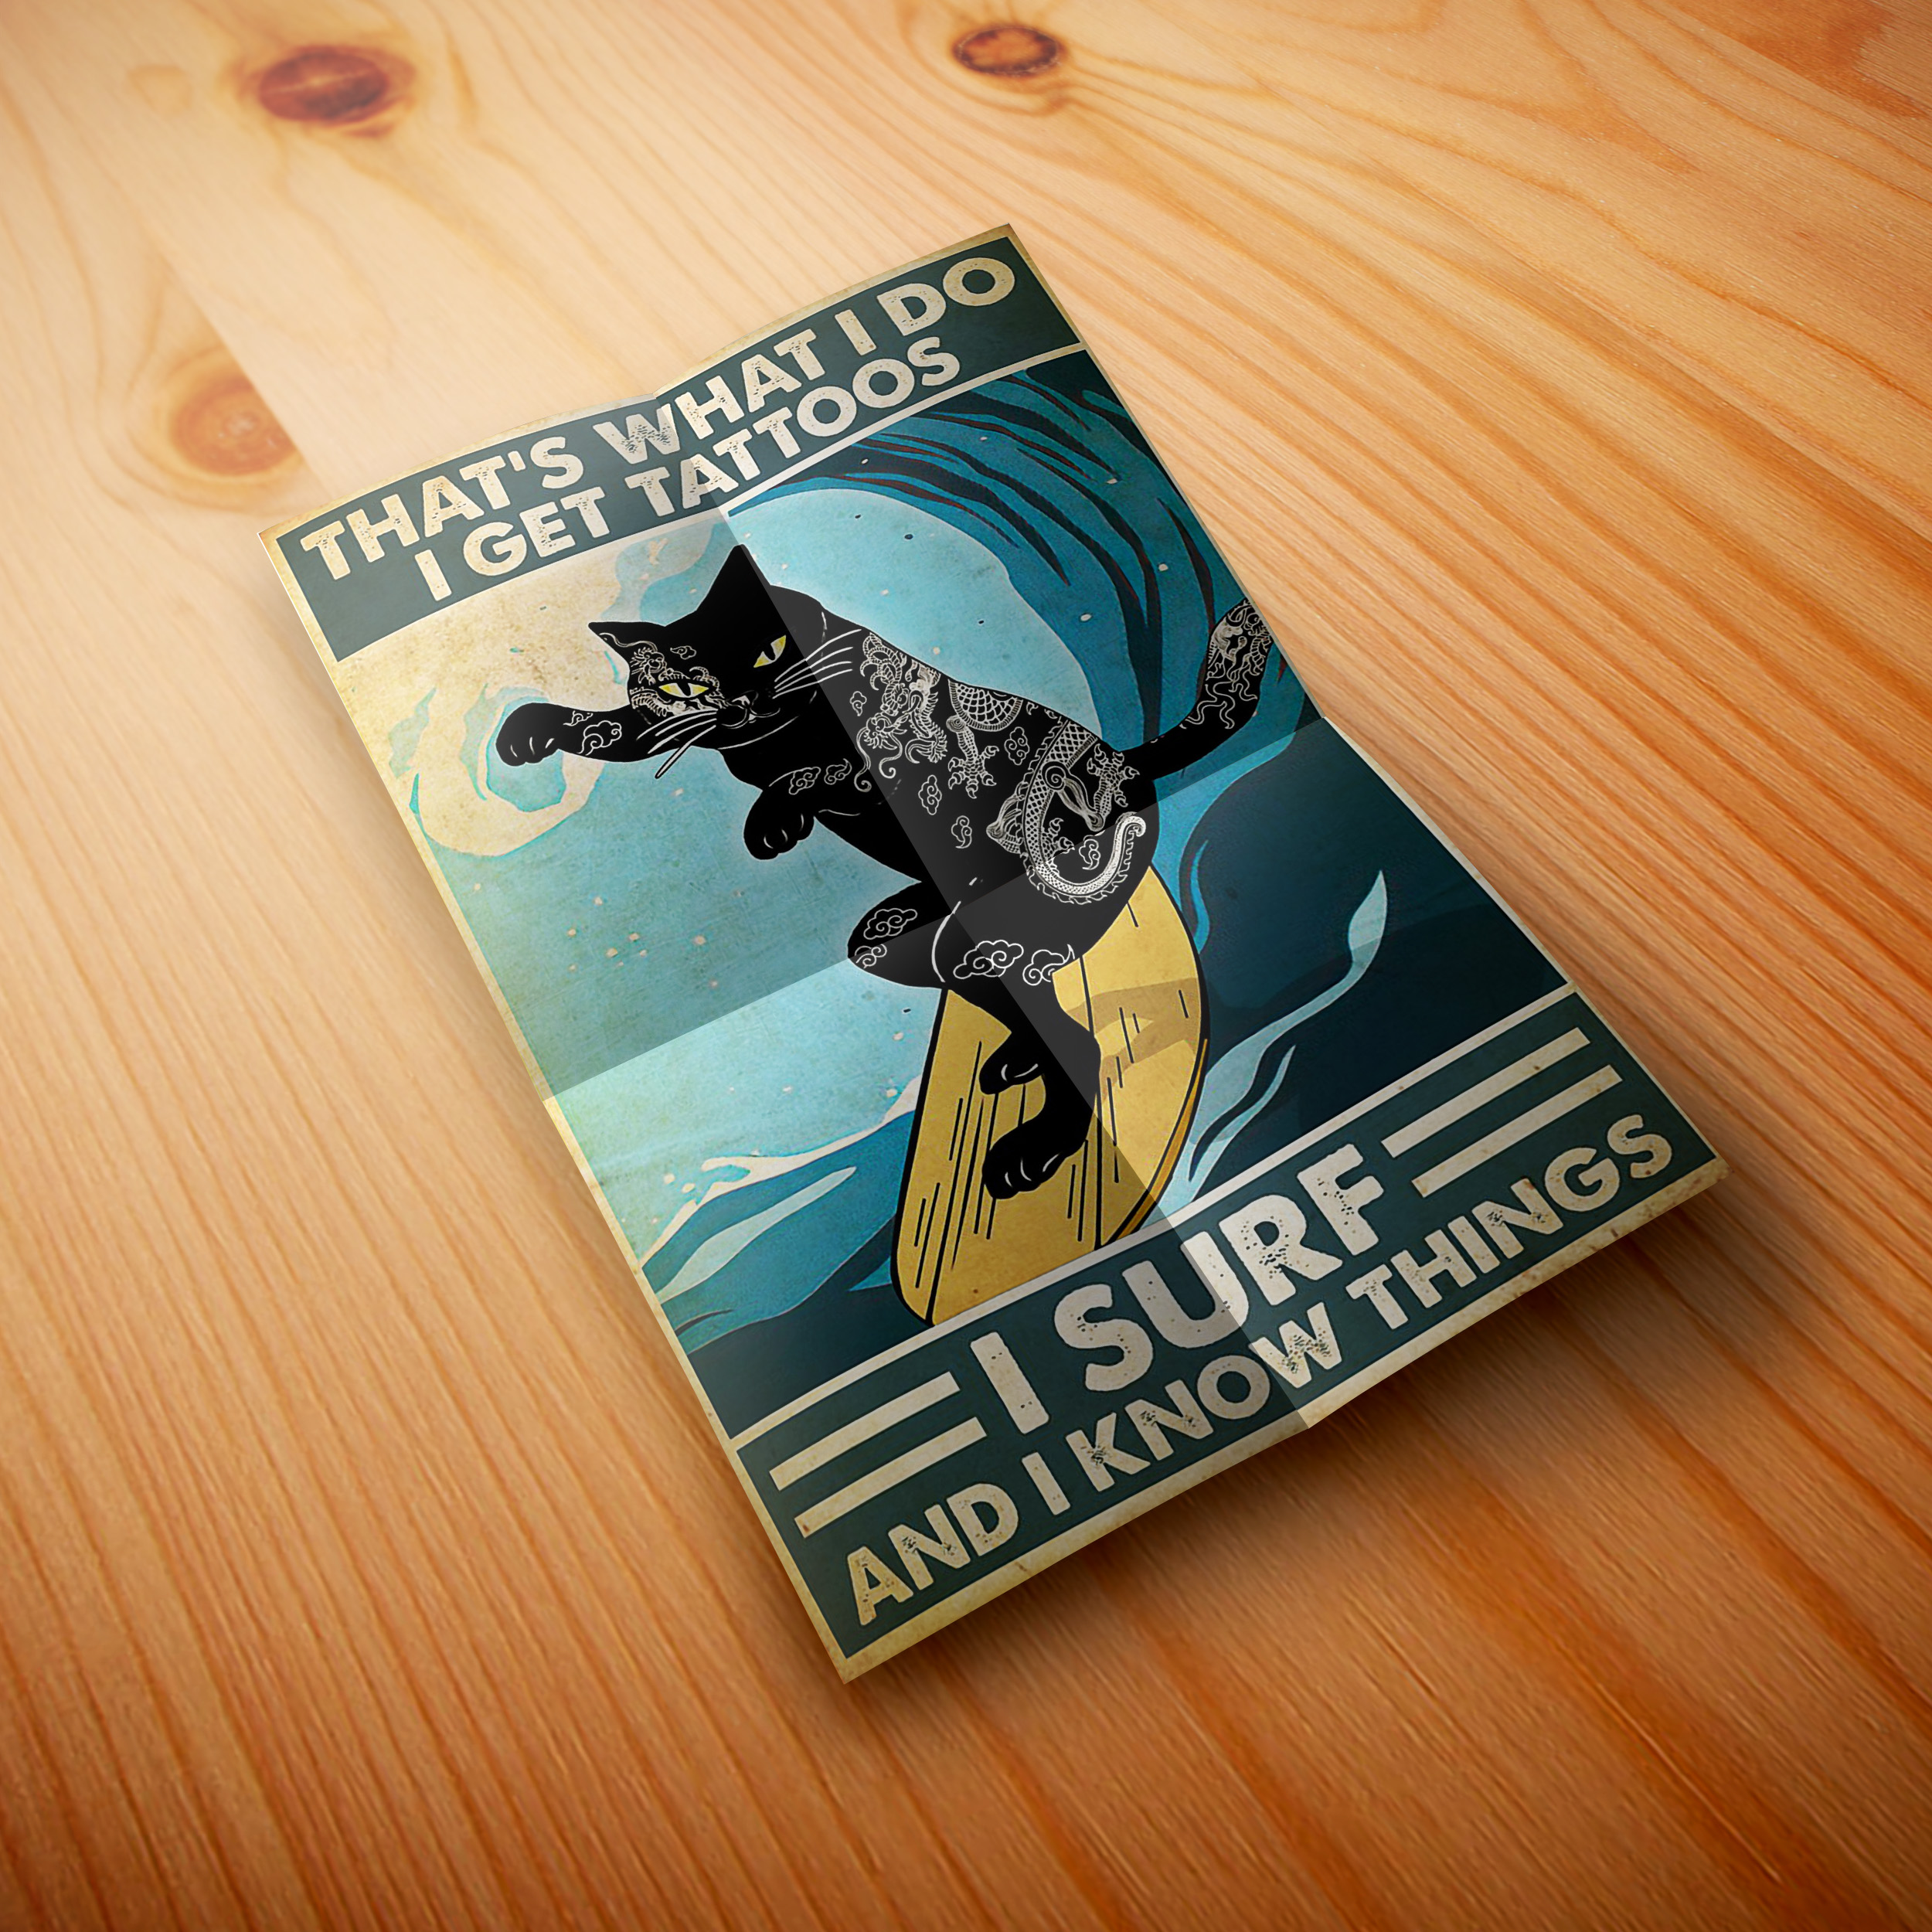 Cat surfing that's what i do i get tattoos poster